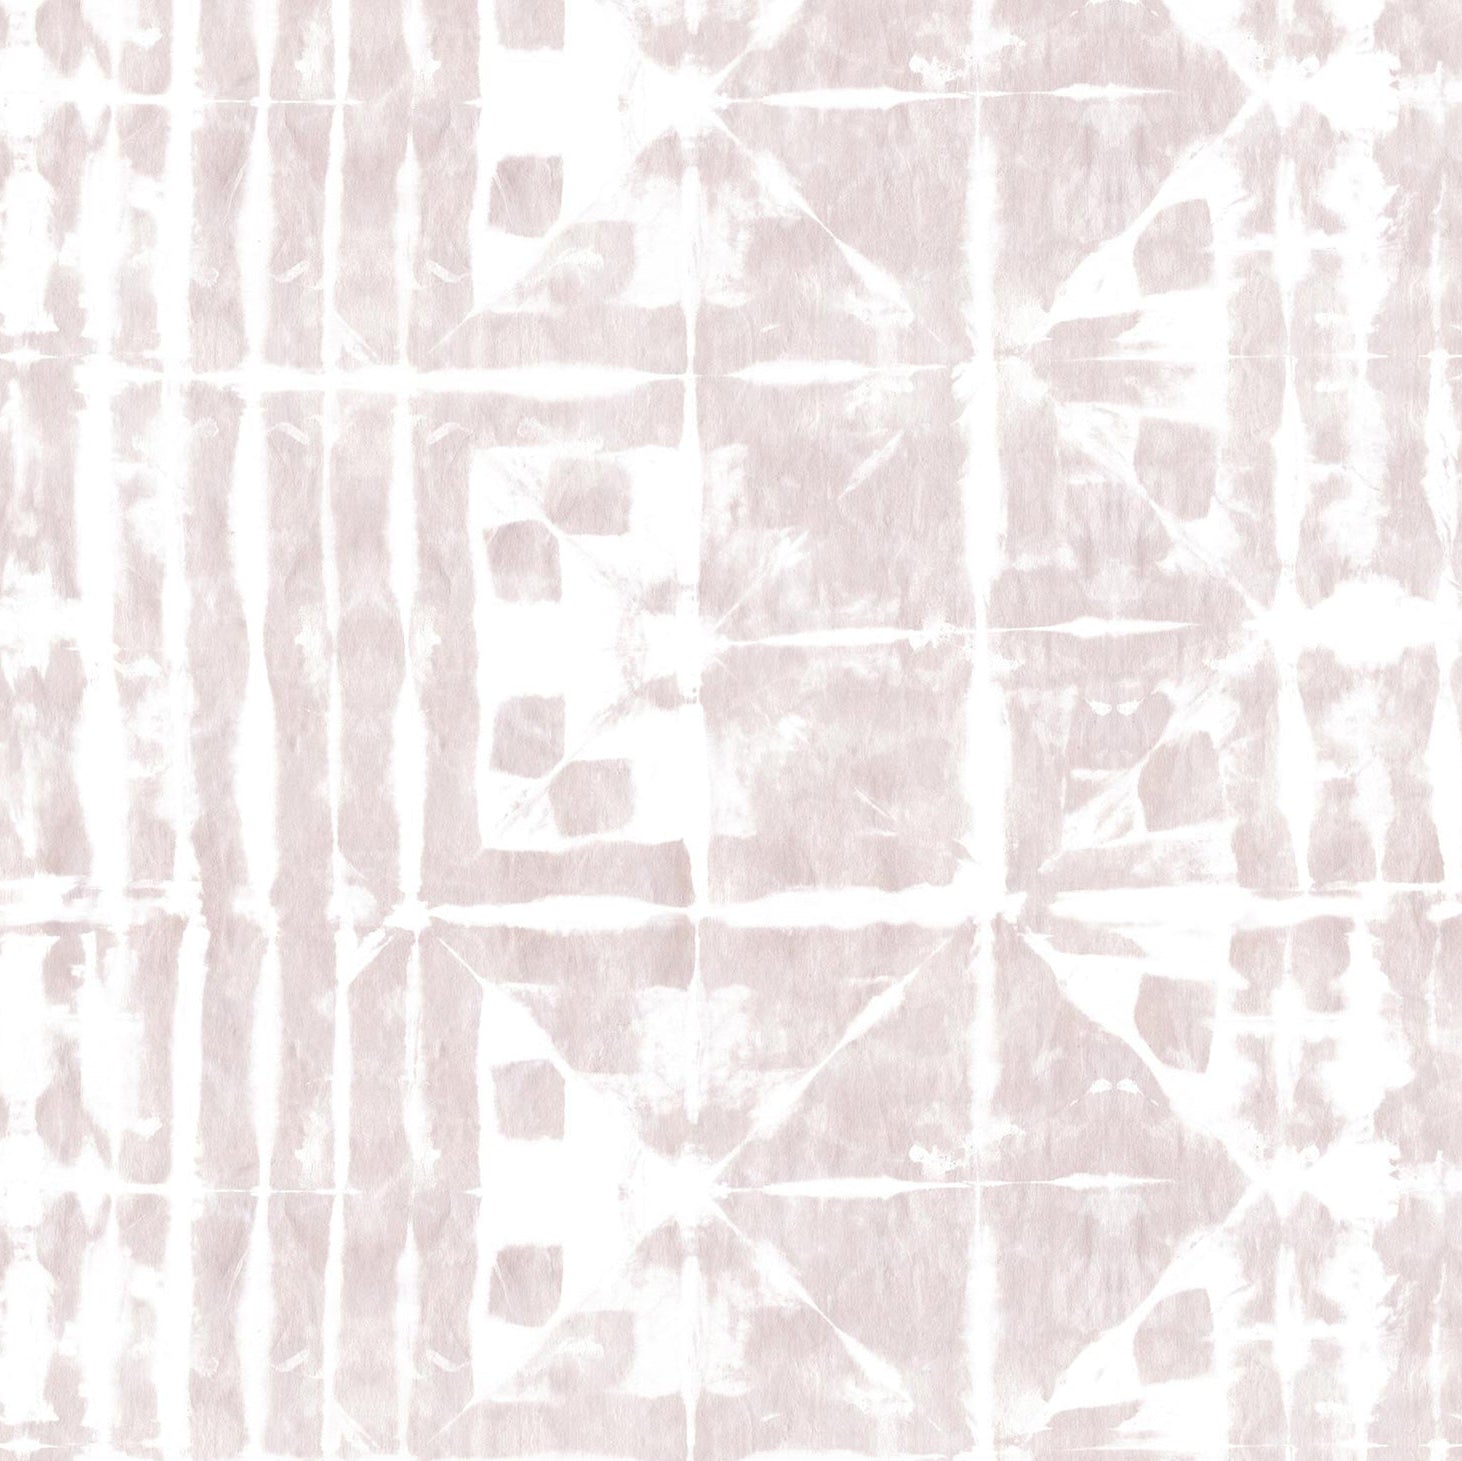 Detail of wallpaper in an abstract dyed grid print in mottled white and pink.